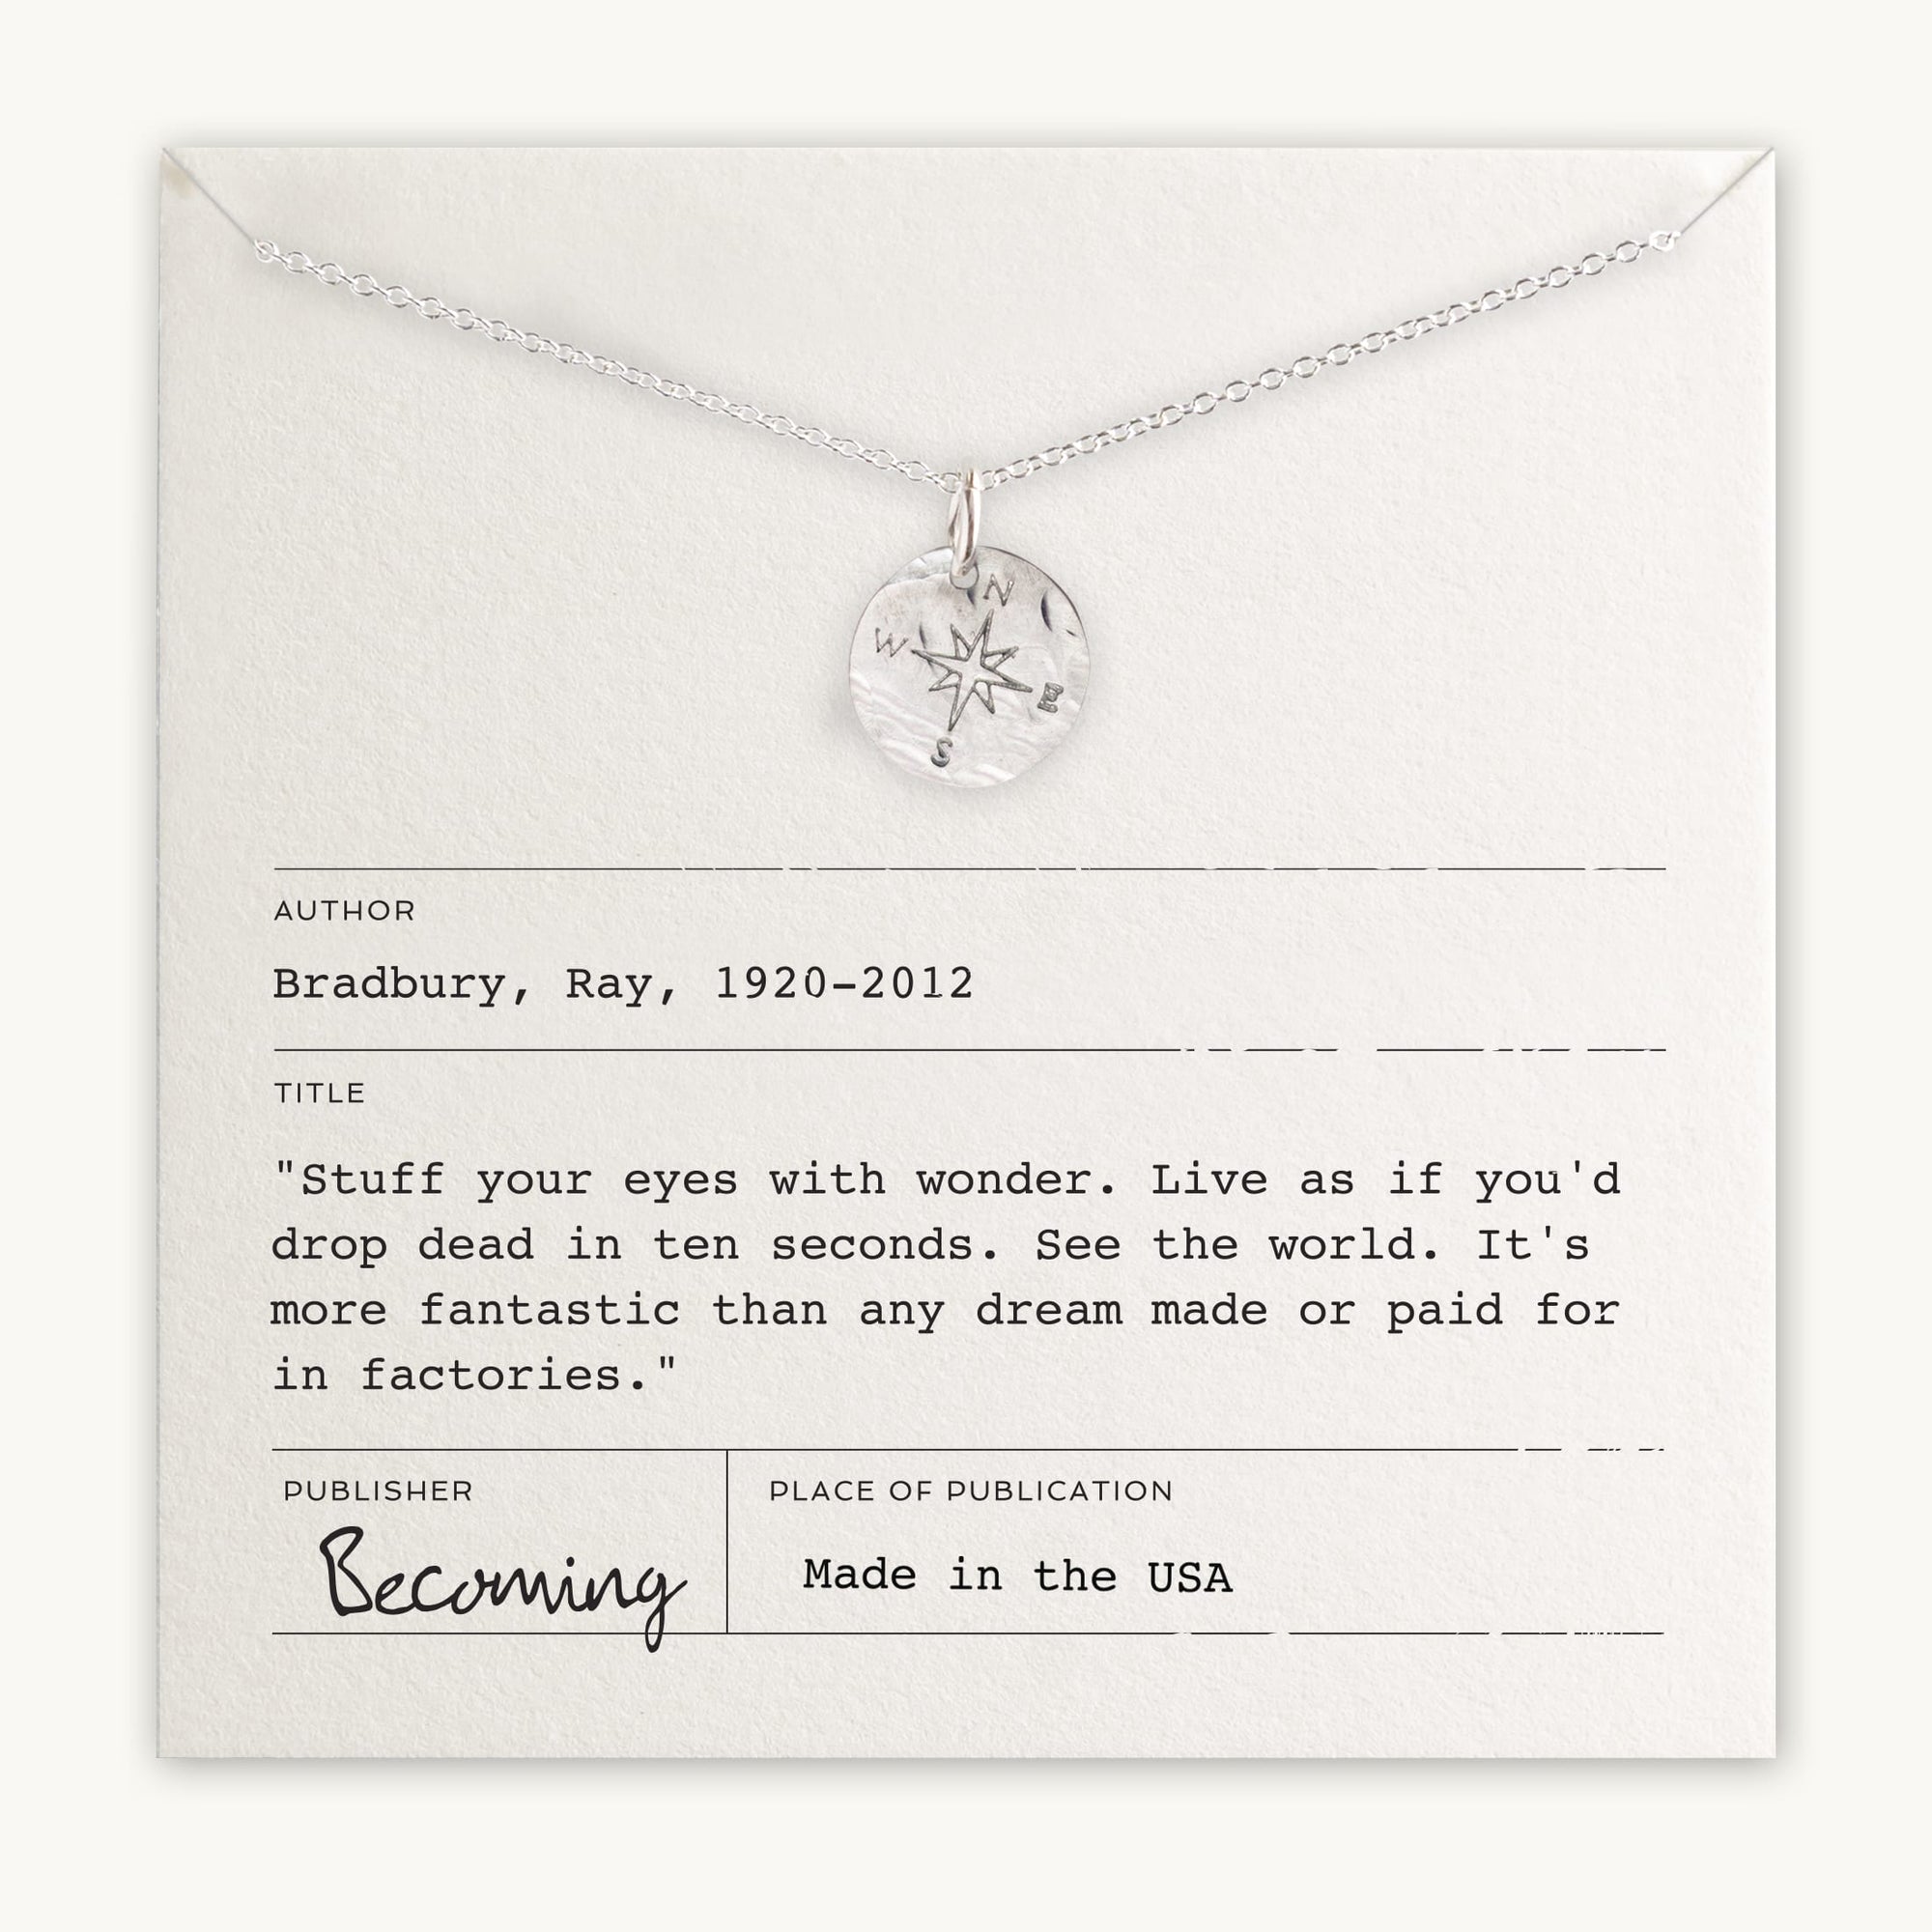 Becoming Jewelry&#39;s sterling silver Compass Necklace displayed on a card with an inspirational quote by Ray Bradbury.